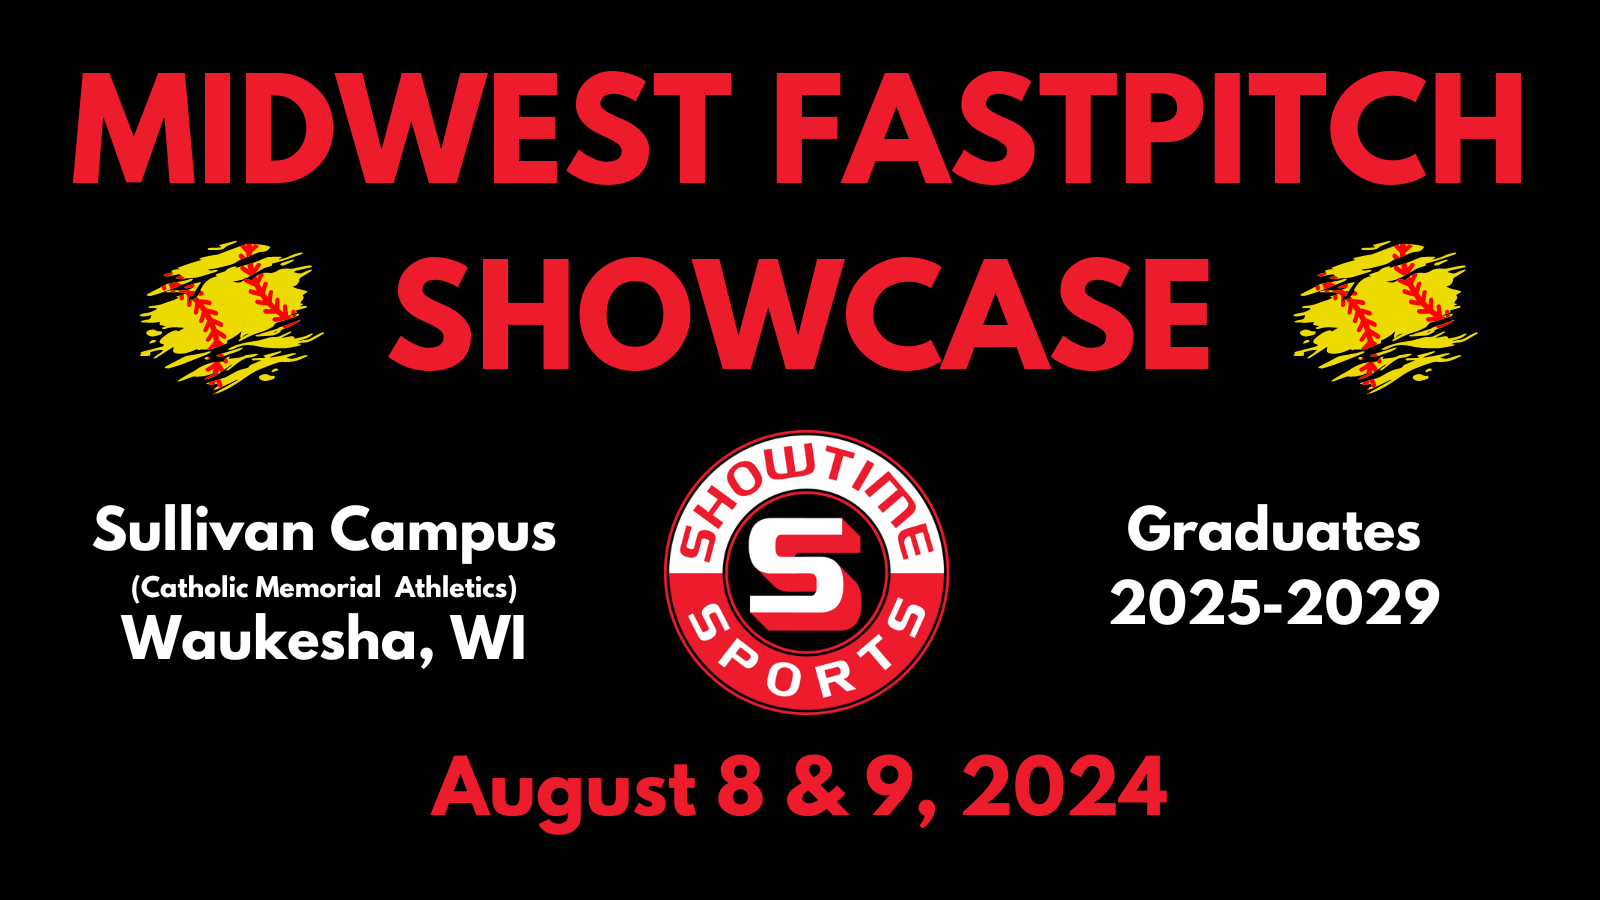 Midwest Fastpitch Showcase 2024